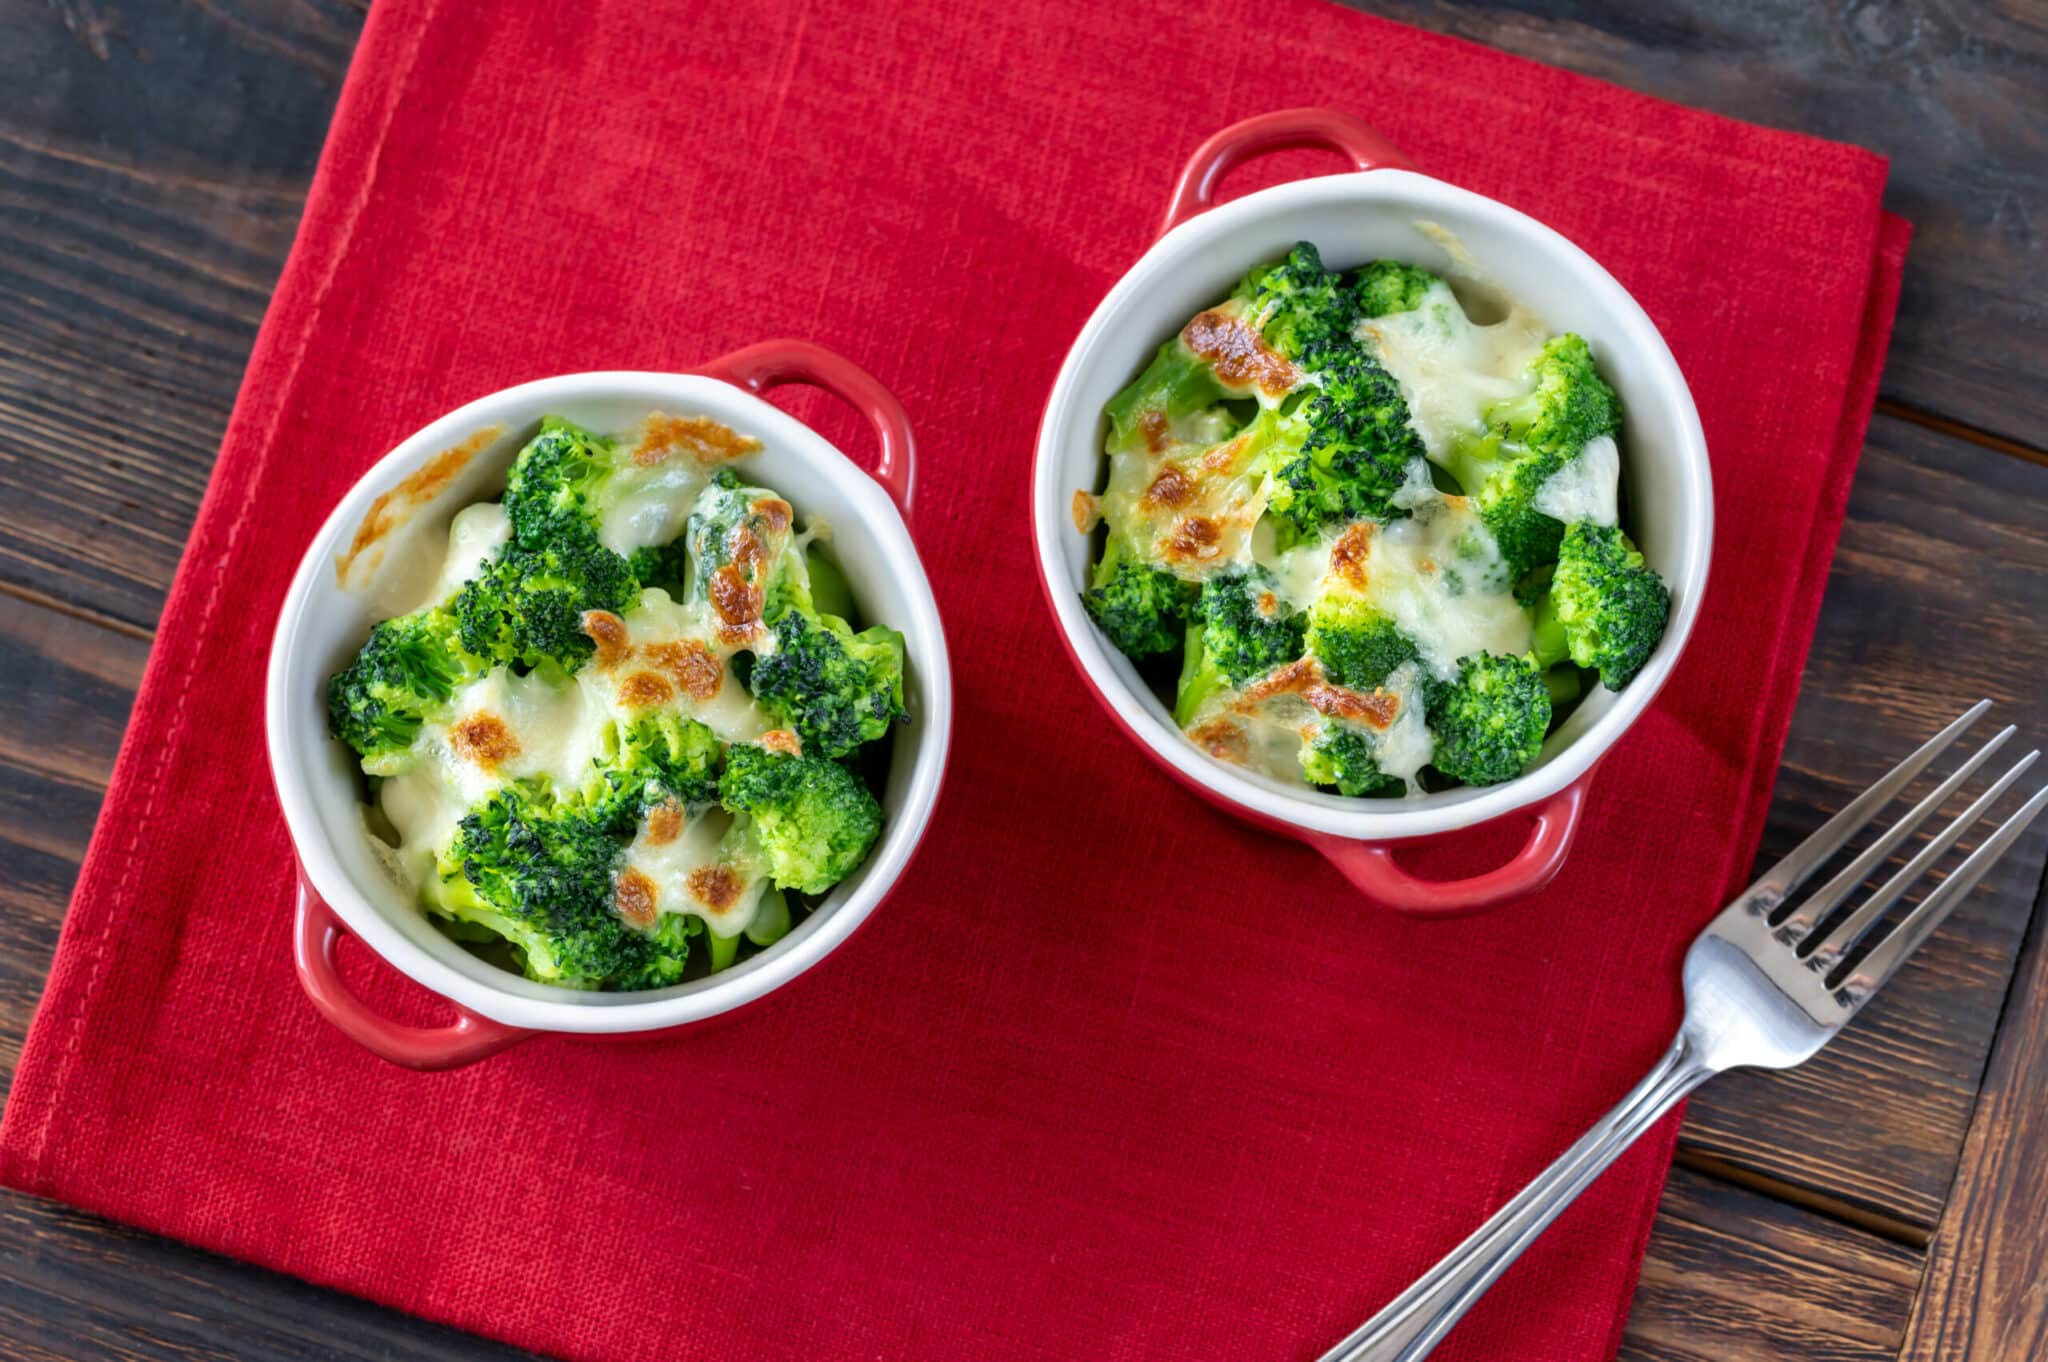 How to Cook Broccoli and Cheese